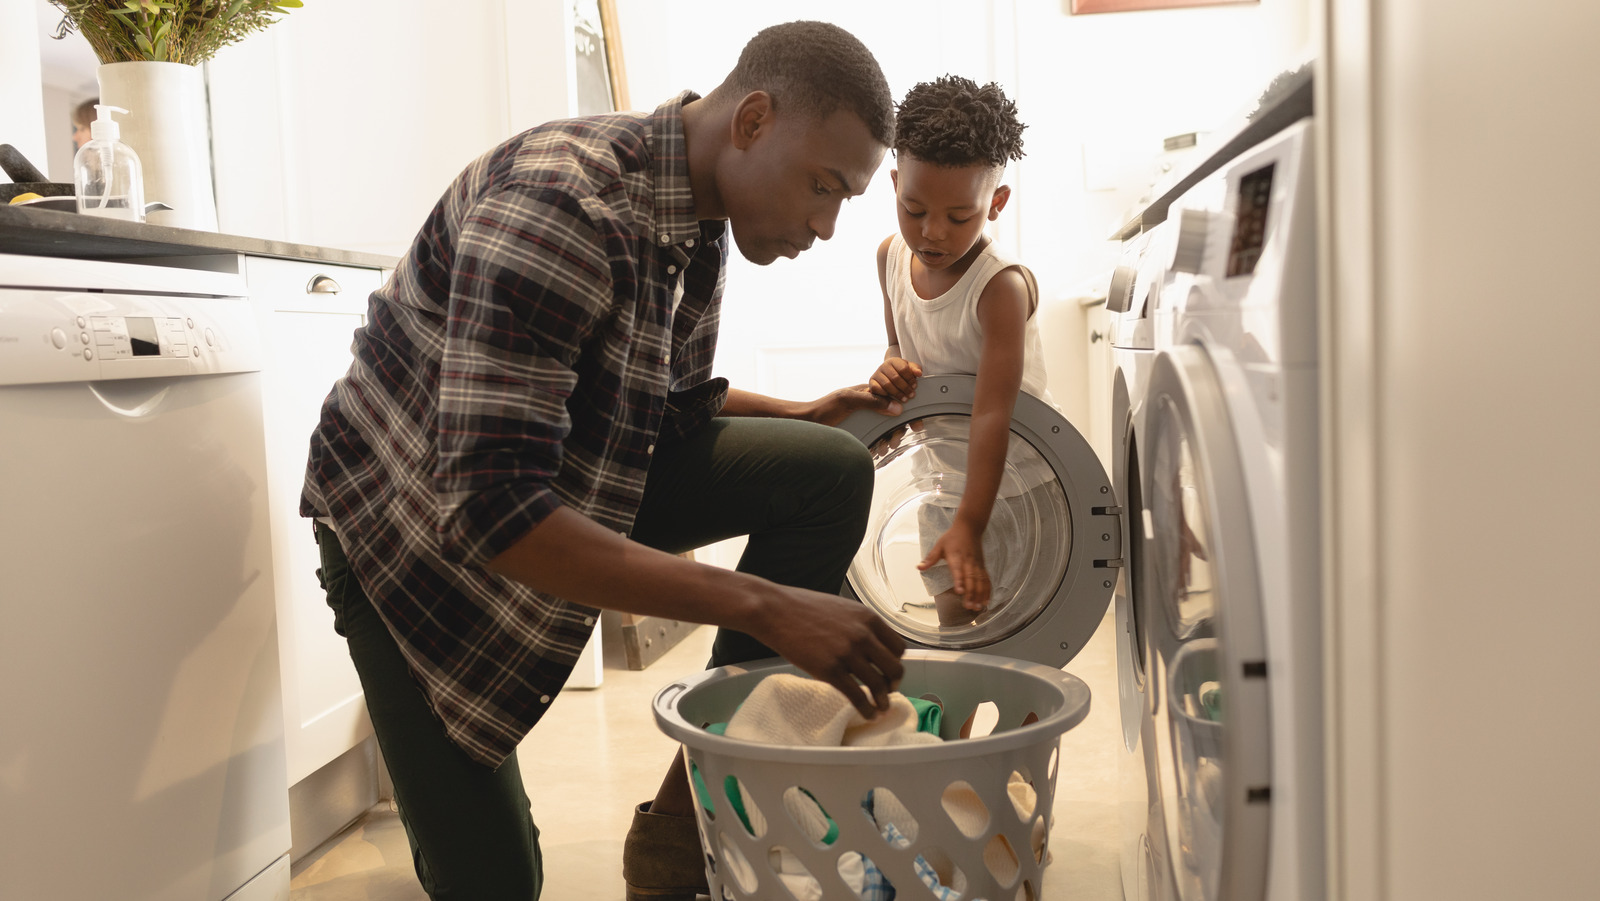 Is Your Washing Machine Making You and Your Family Sick?